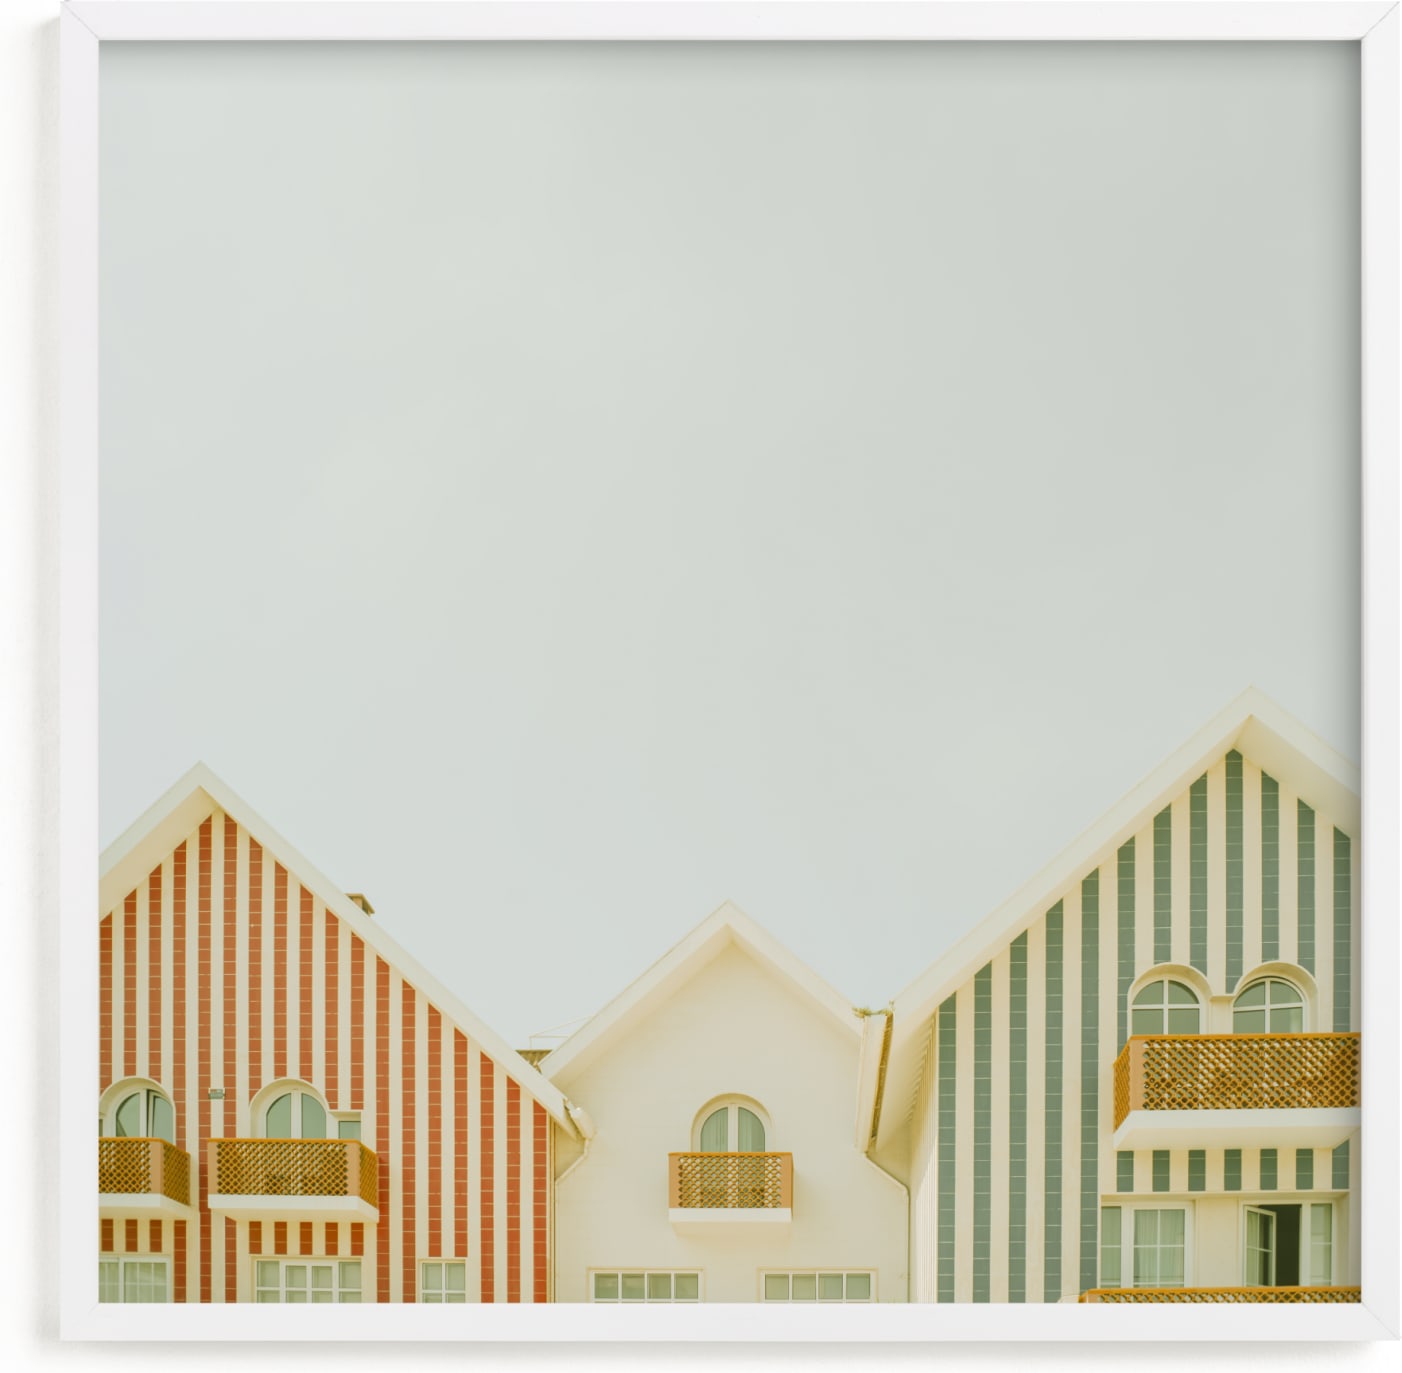 This is a blue art by Lena Erysheva called Striped houses.